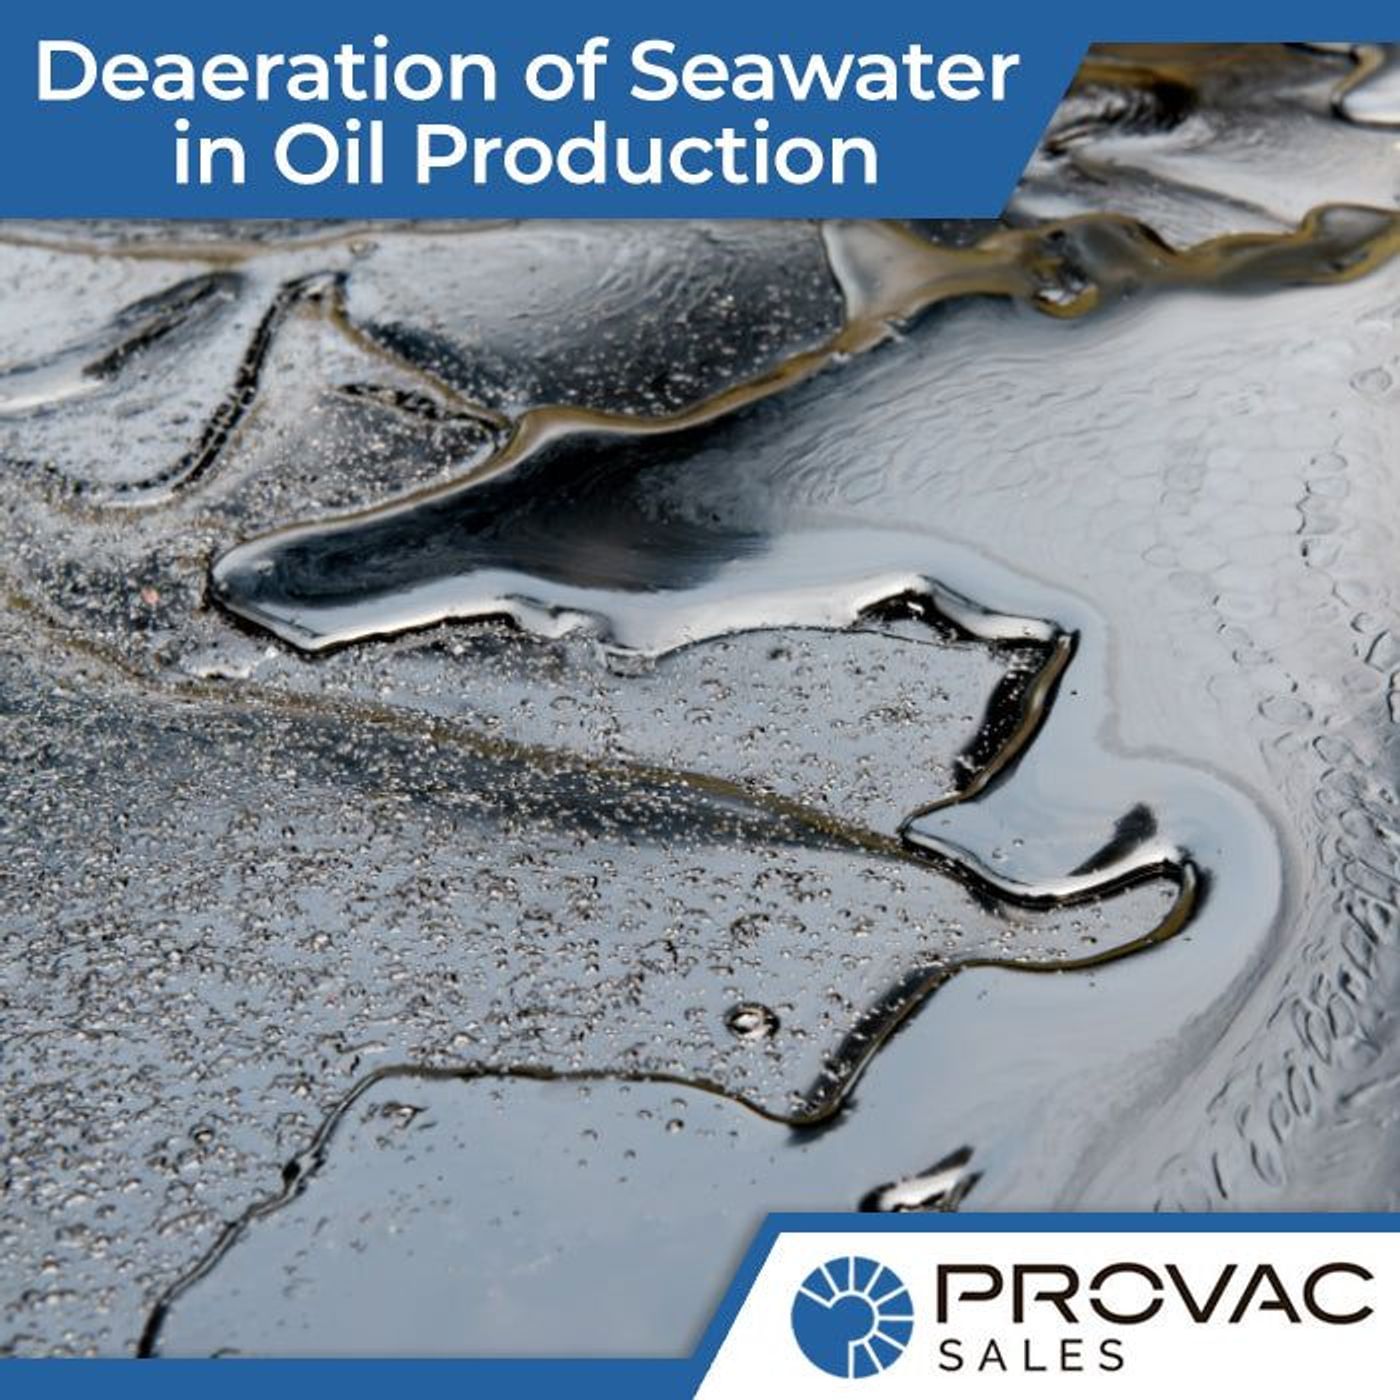 The Process of Deaeration of Seawater in Oil Production